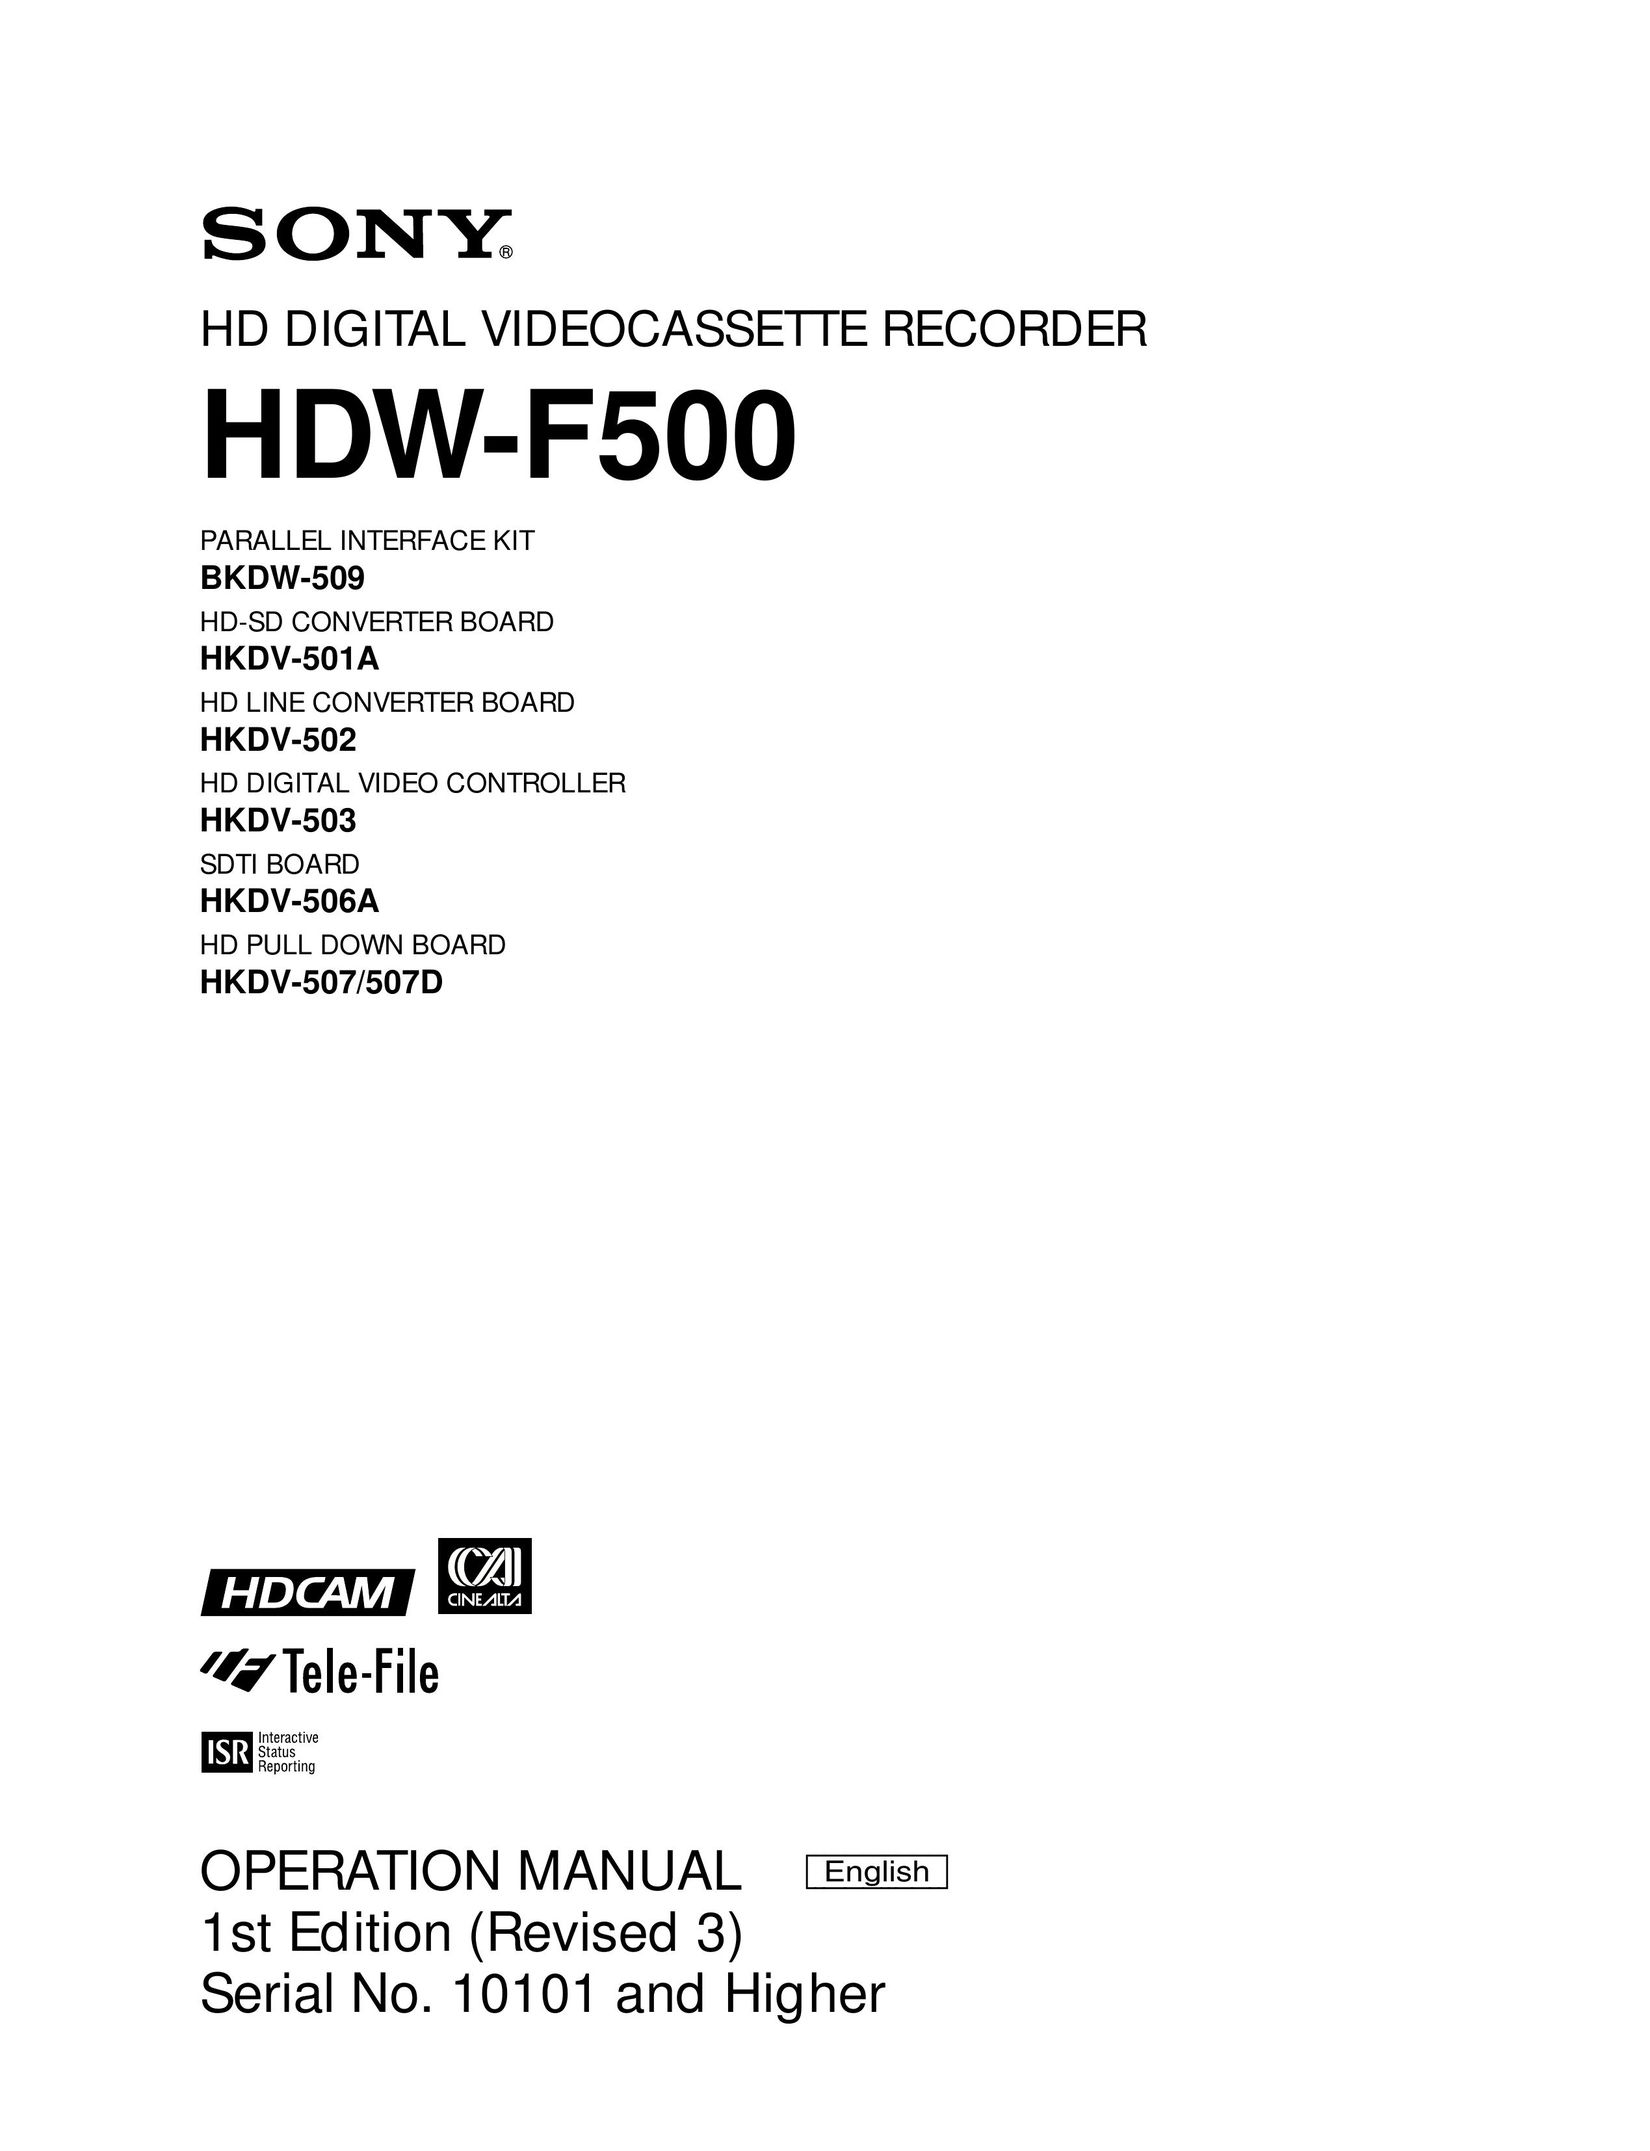 Sony HDW-F500 DVD VCR Combo User Manual